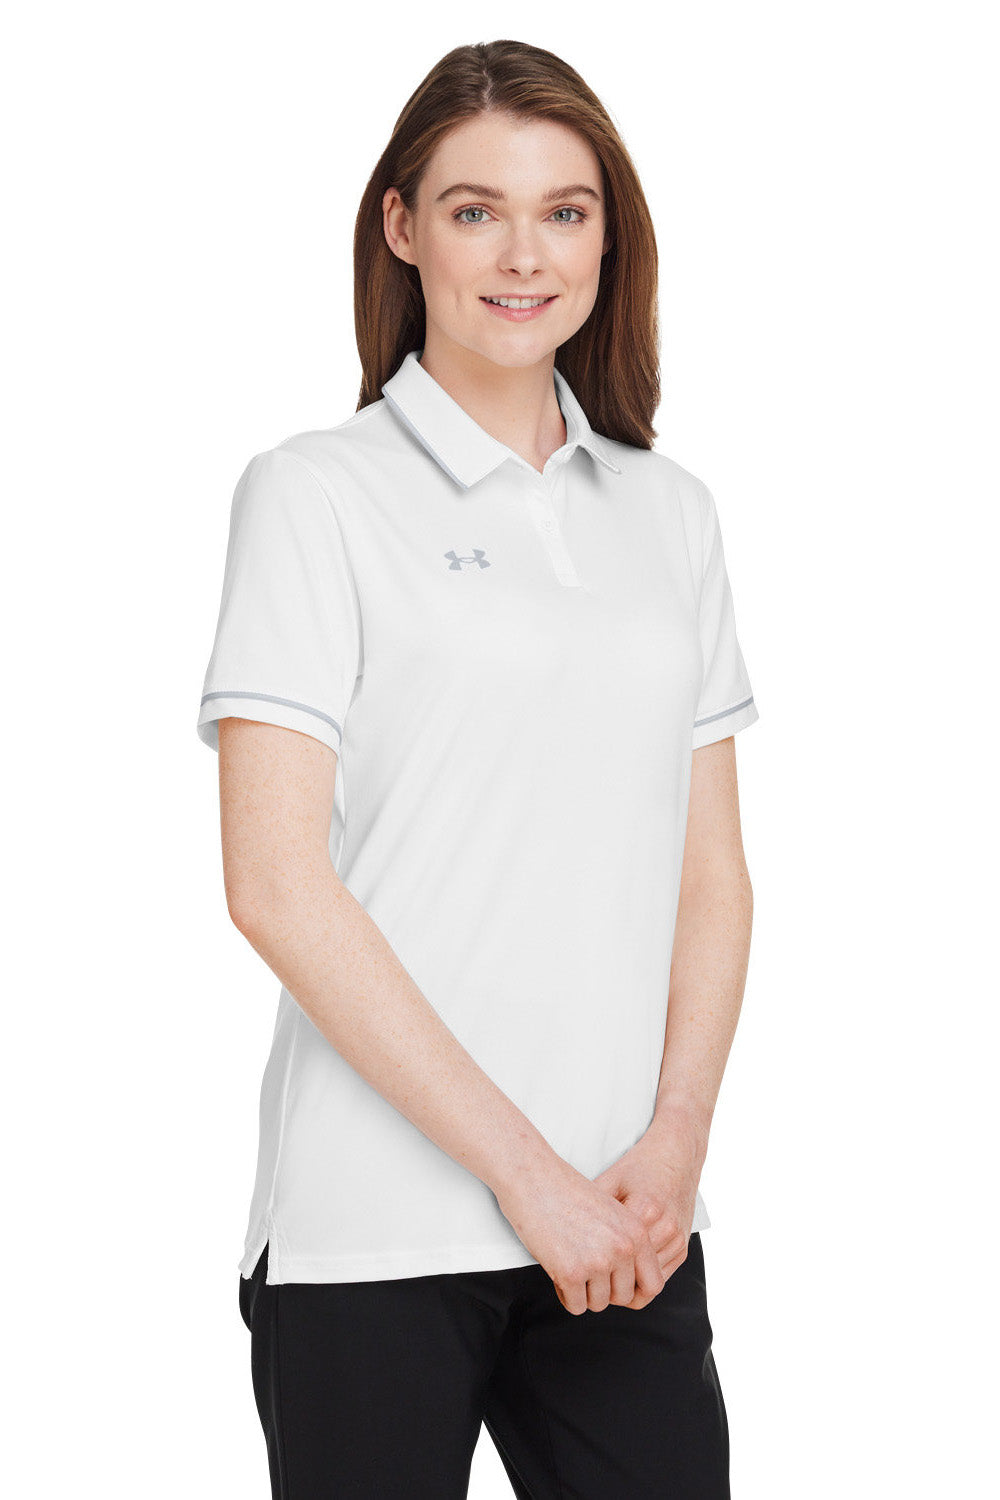 Under Armour 1376905 Womens Teams Performance Moisture Wicking Short Sleeve Polo Shirt White Model 3Q